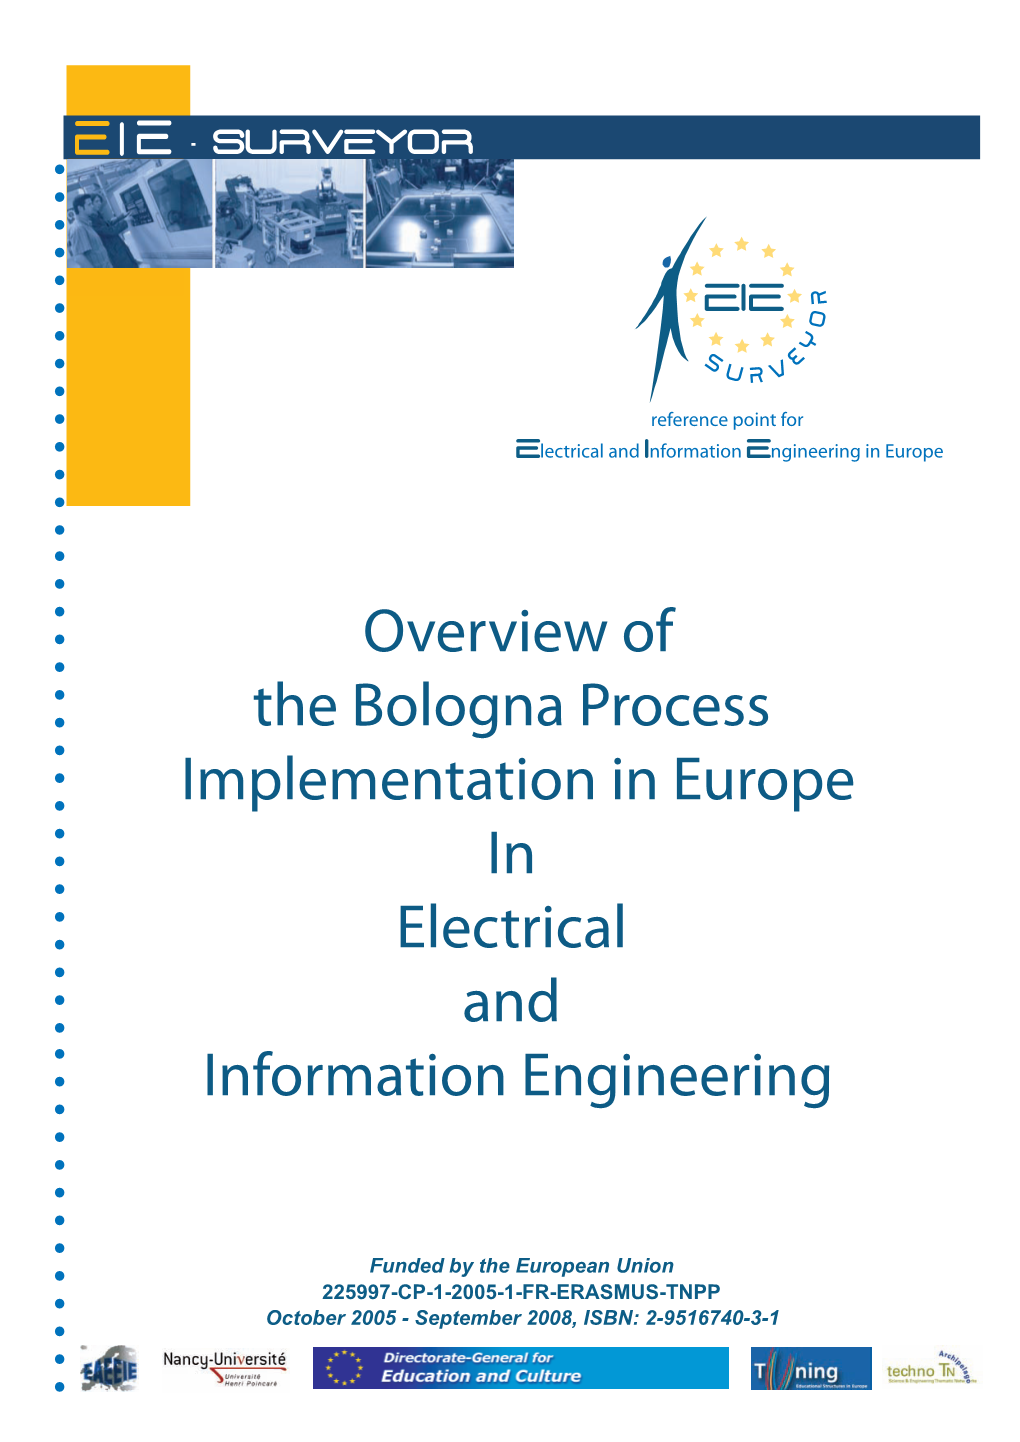 Implementation in Europe in Electrical and Information Engineering (Bachelor, Master, Doctoral Studies)